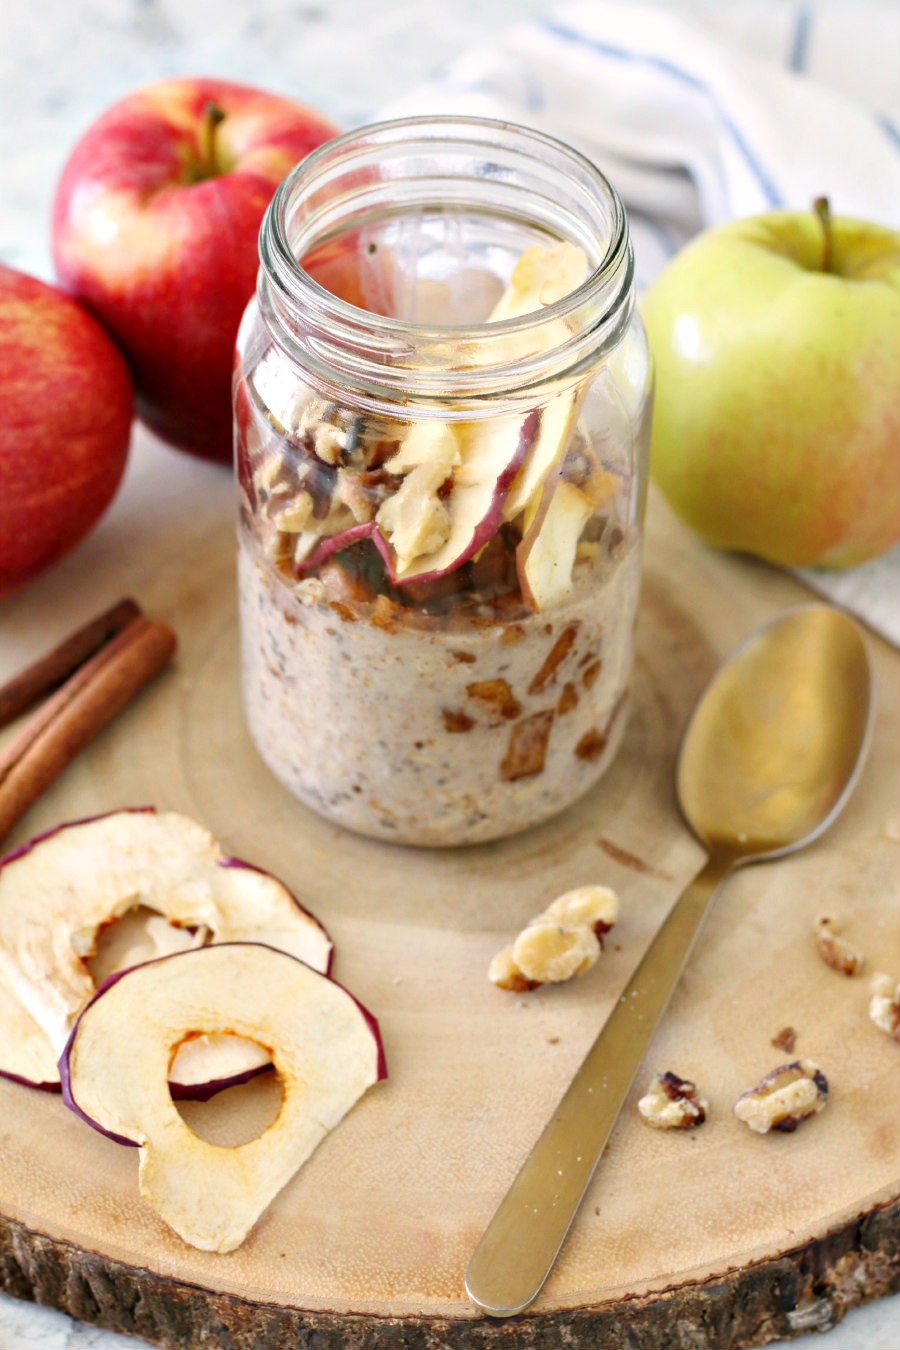 Apple Pie Overnight Oats on a wood slice with apples, dried apples, cinnamon sticks, walnuts, and a gold spoon in photo.